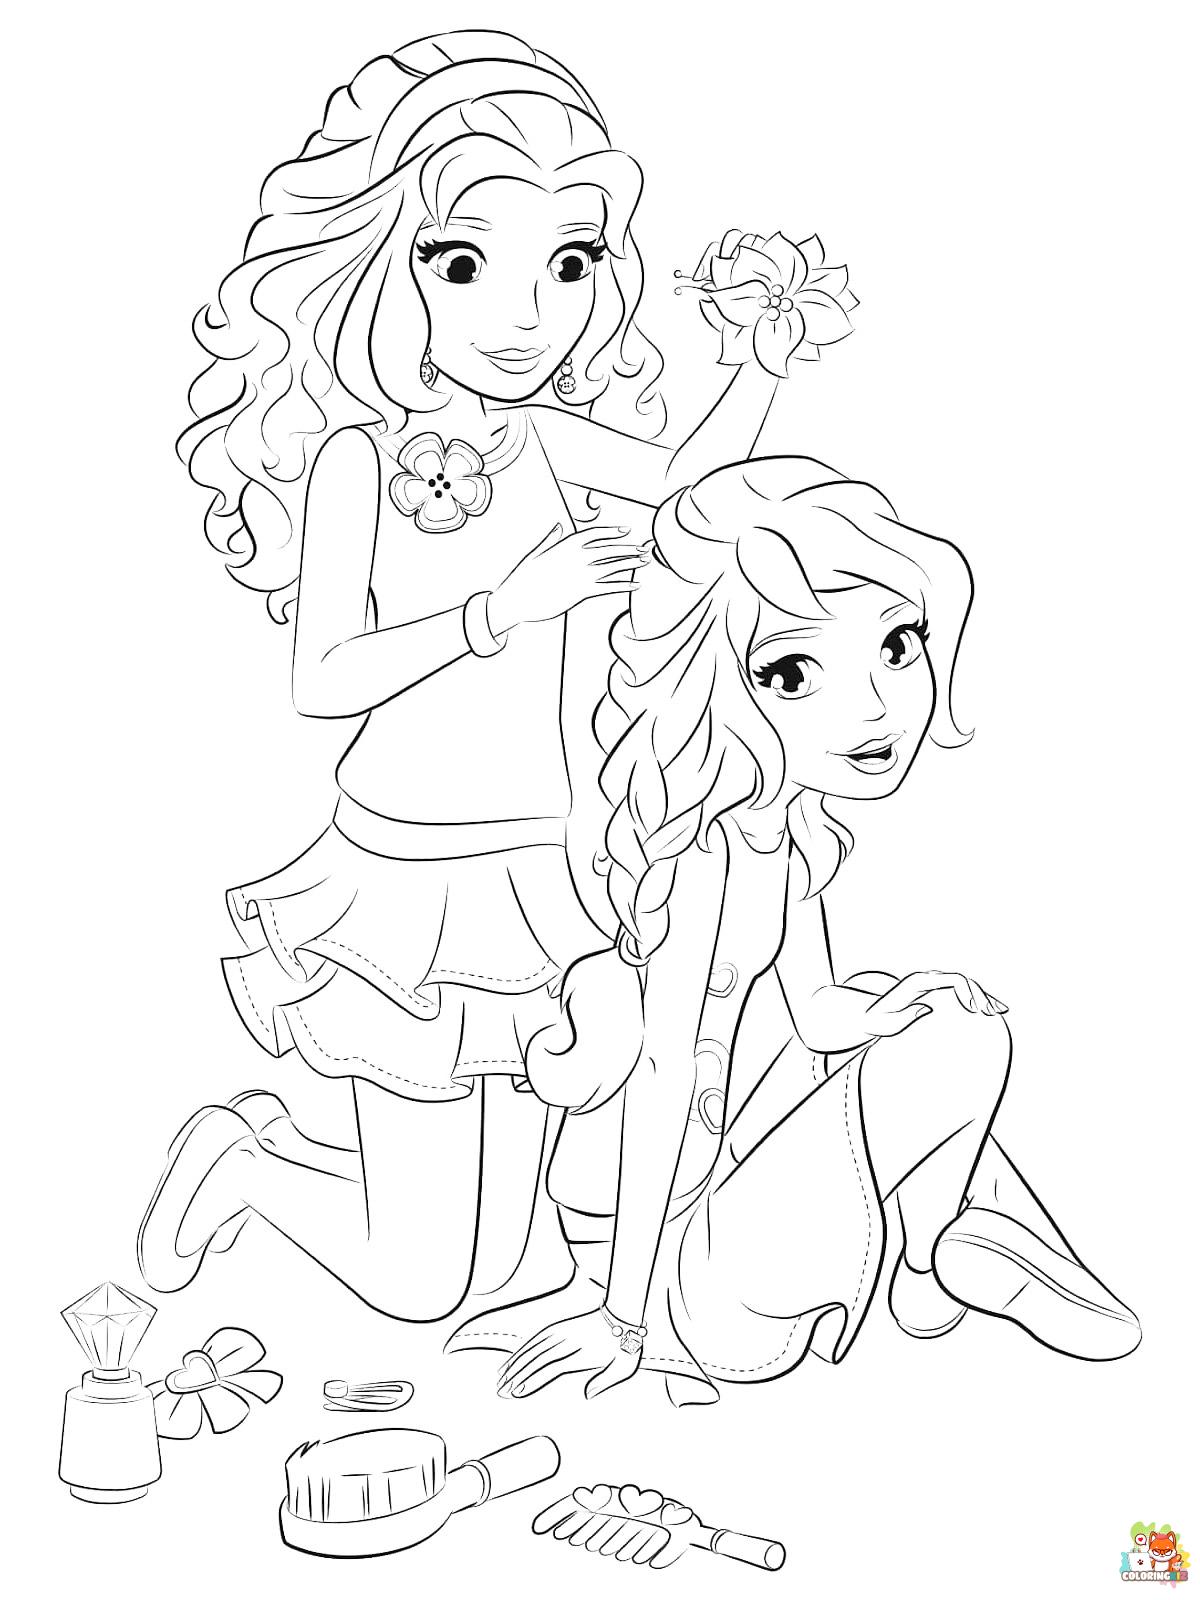 Lego Friends Coloring Pages 10